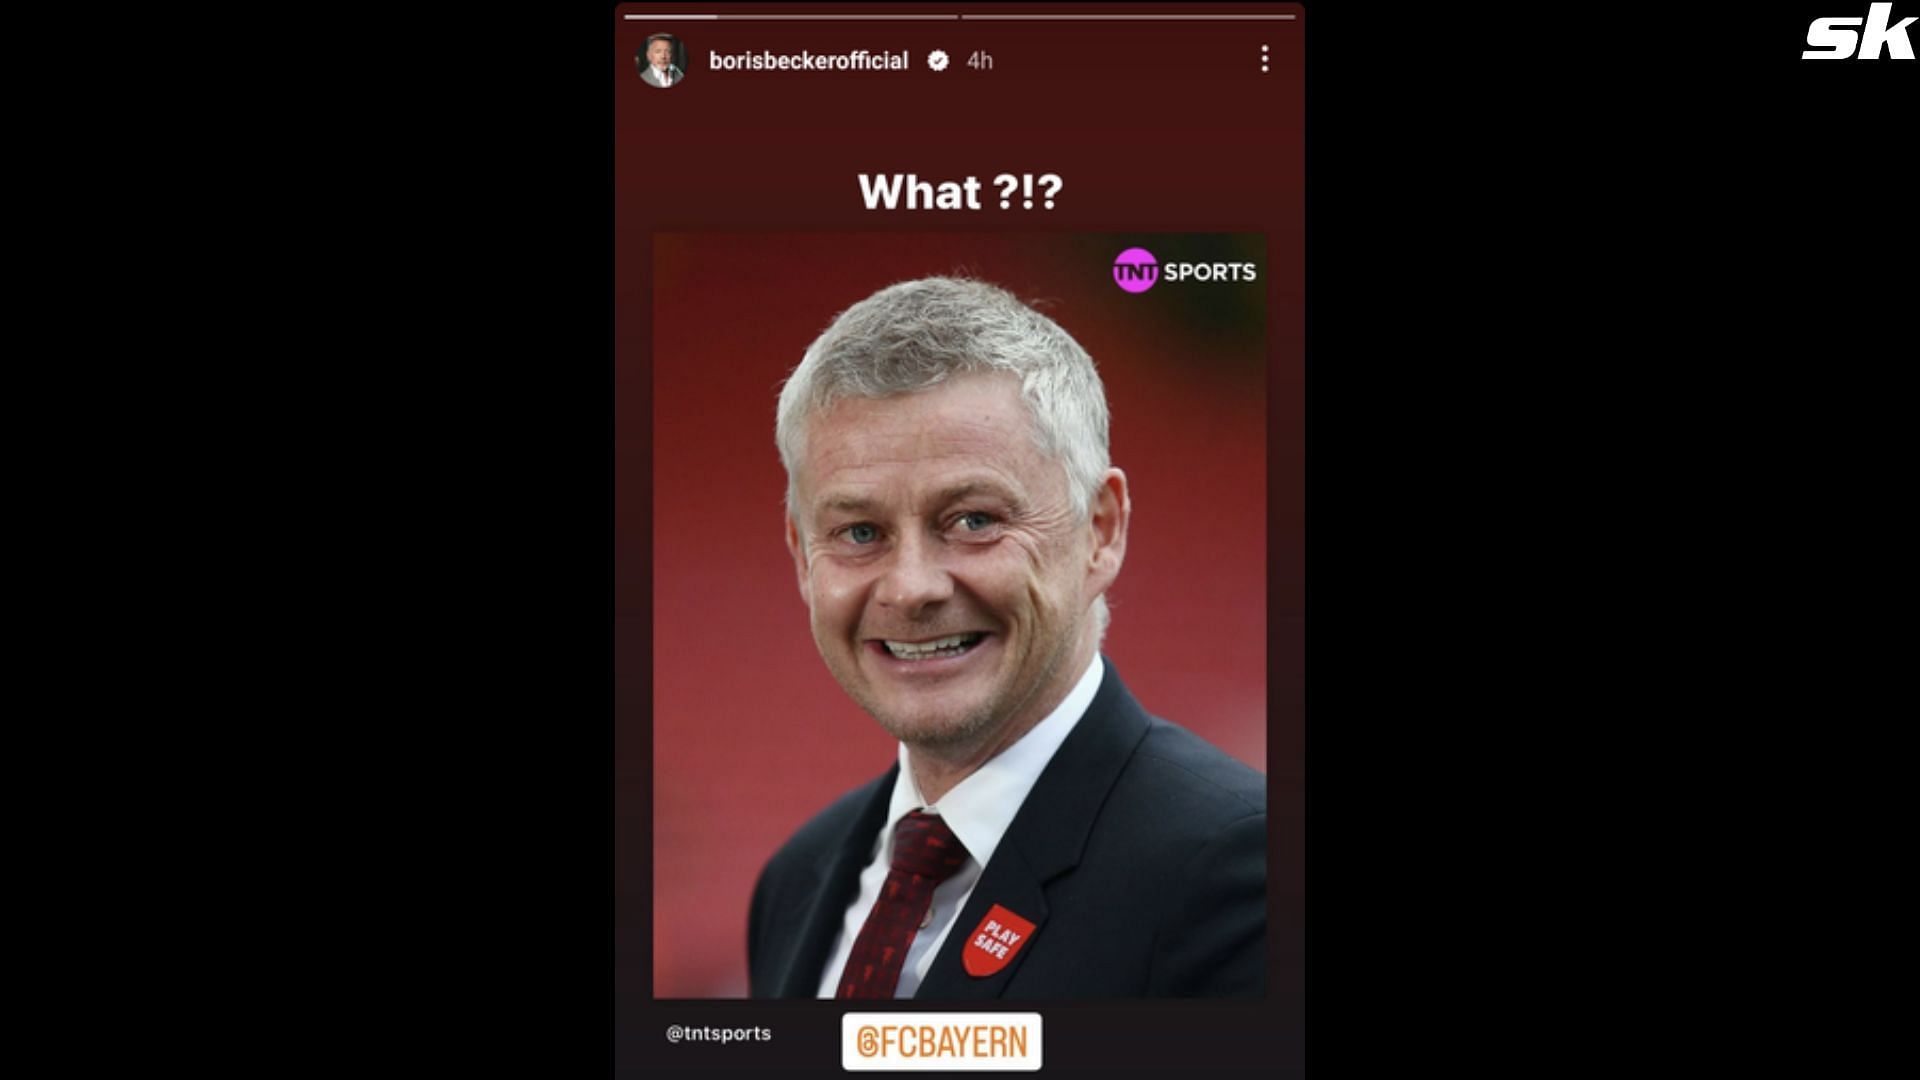 Boris Becker reacts to speculations of Ole Gunnar Solskjaer taking over as interim manager of Bayern Munich